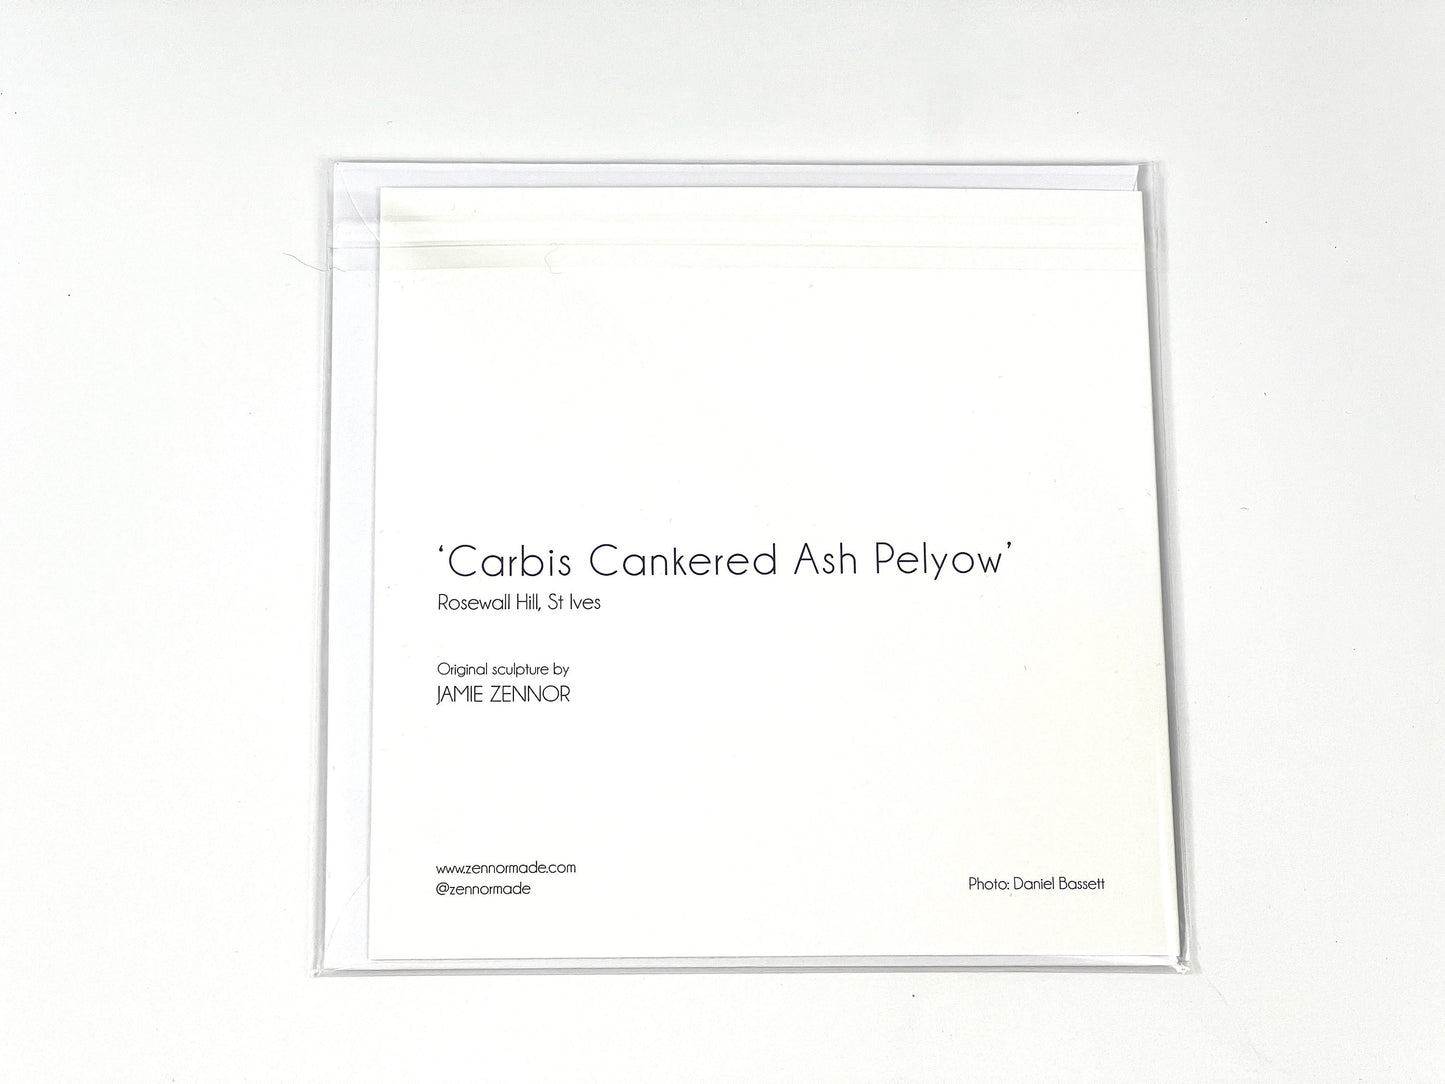 Carbis Bay Cankered Ash Pelyow Card